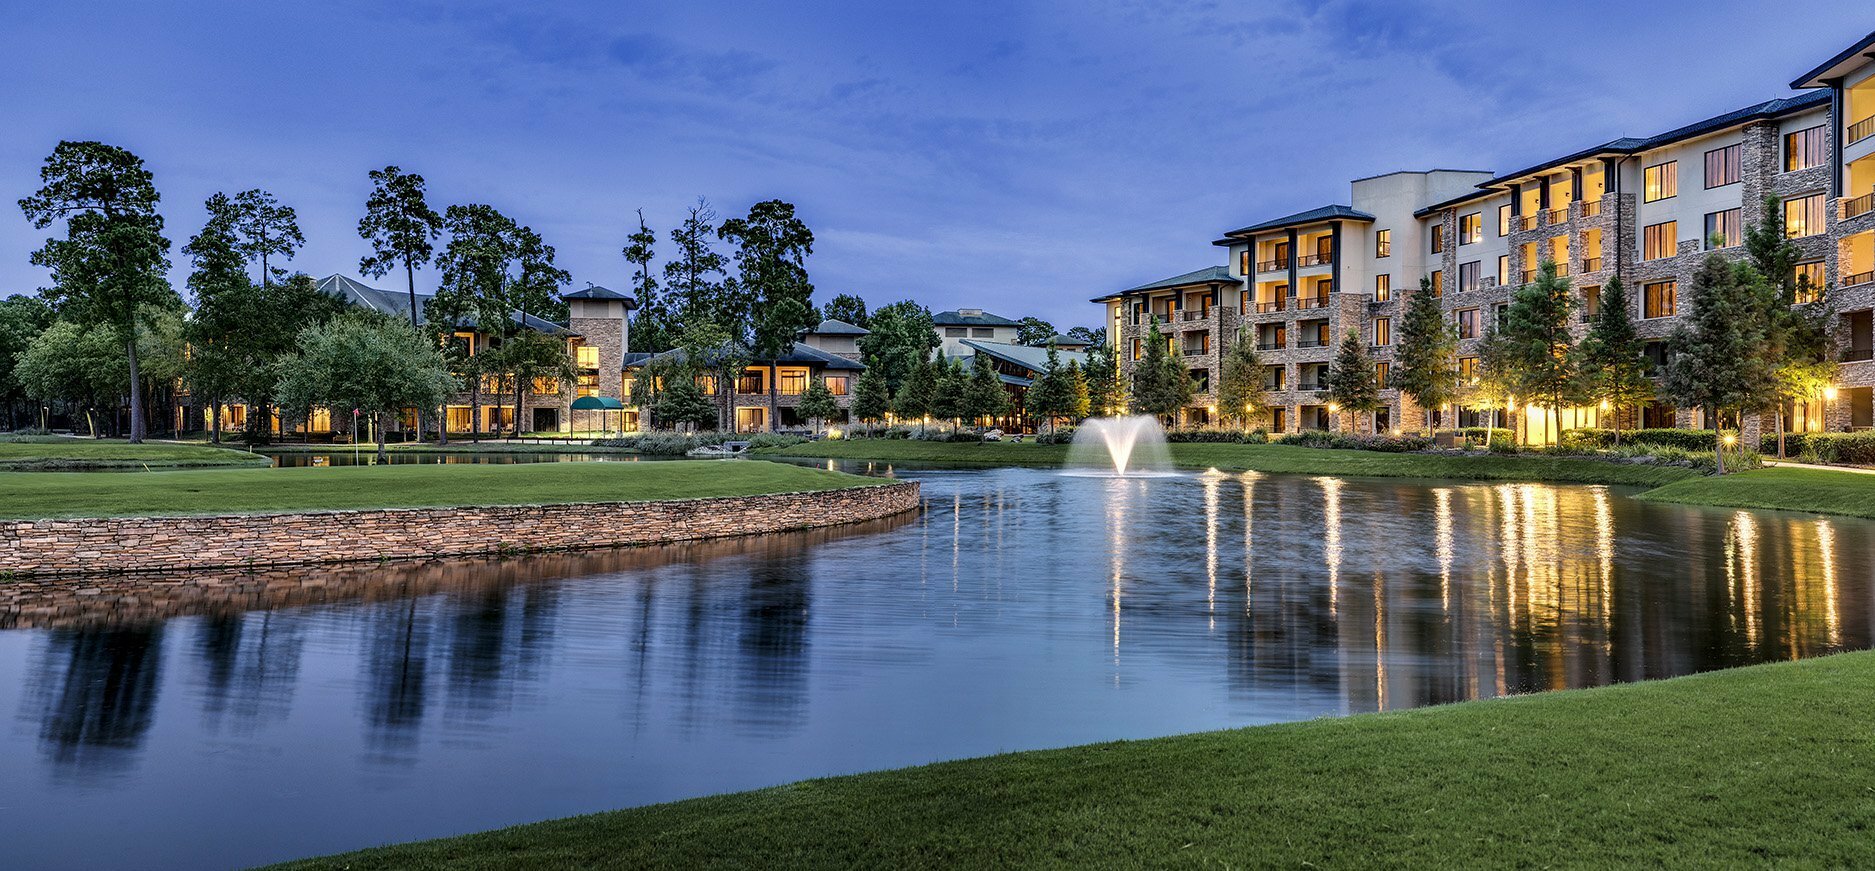 Photo of The Woodlands Resort, The Woodlands, TX